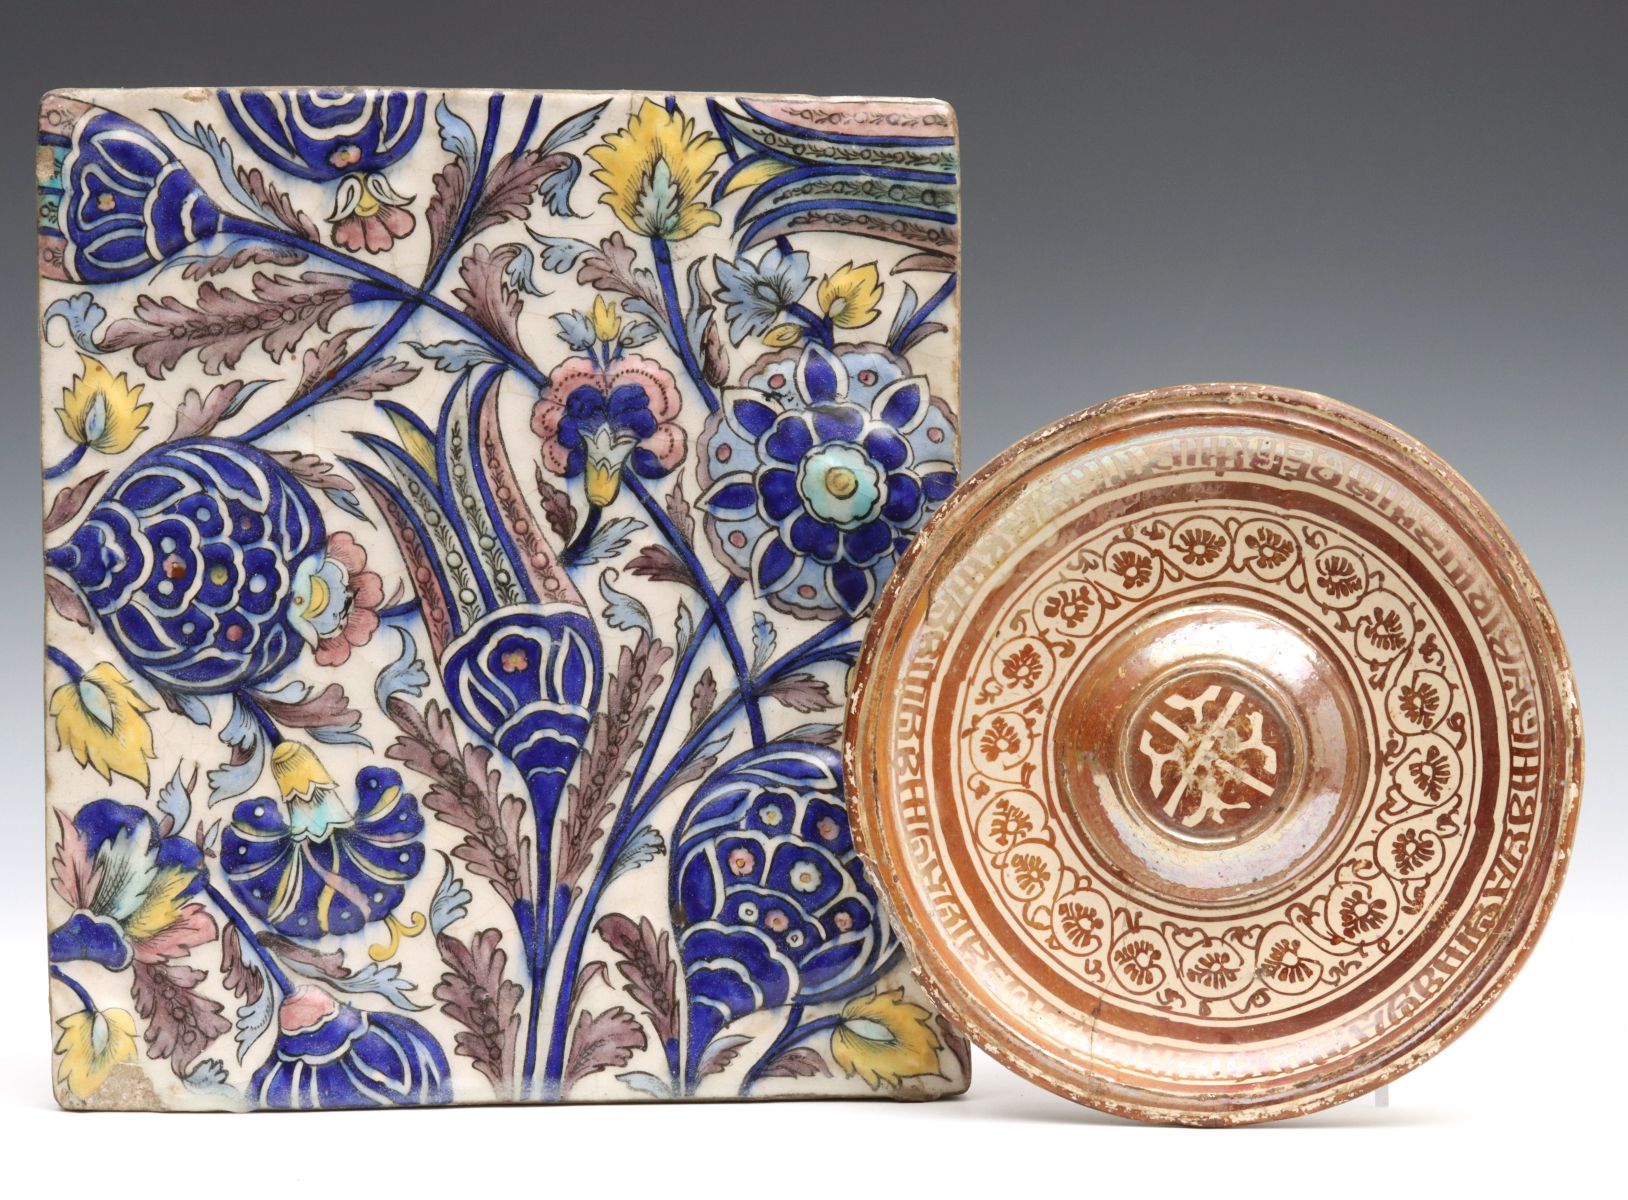 LATE 18TH/EARLY 19TH C. PERSIAN FAIENCE TILE AND PLATE